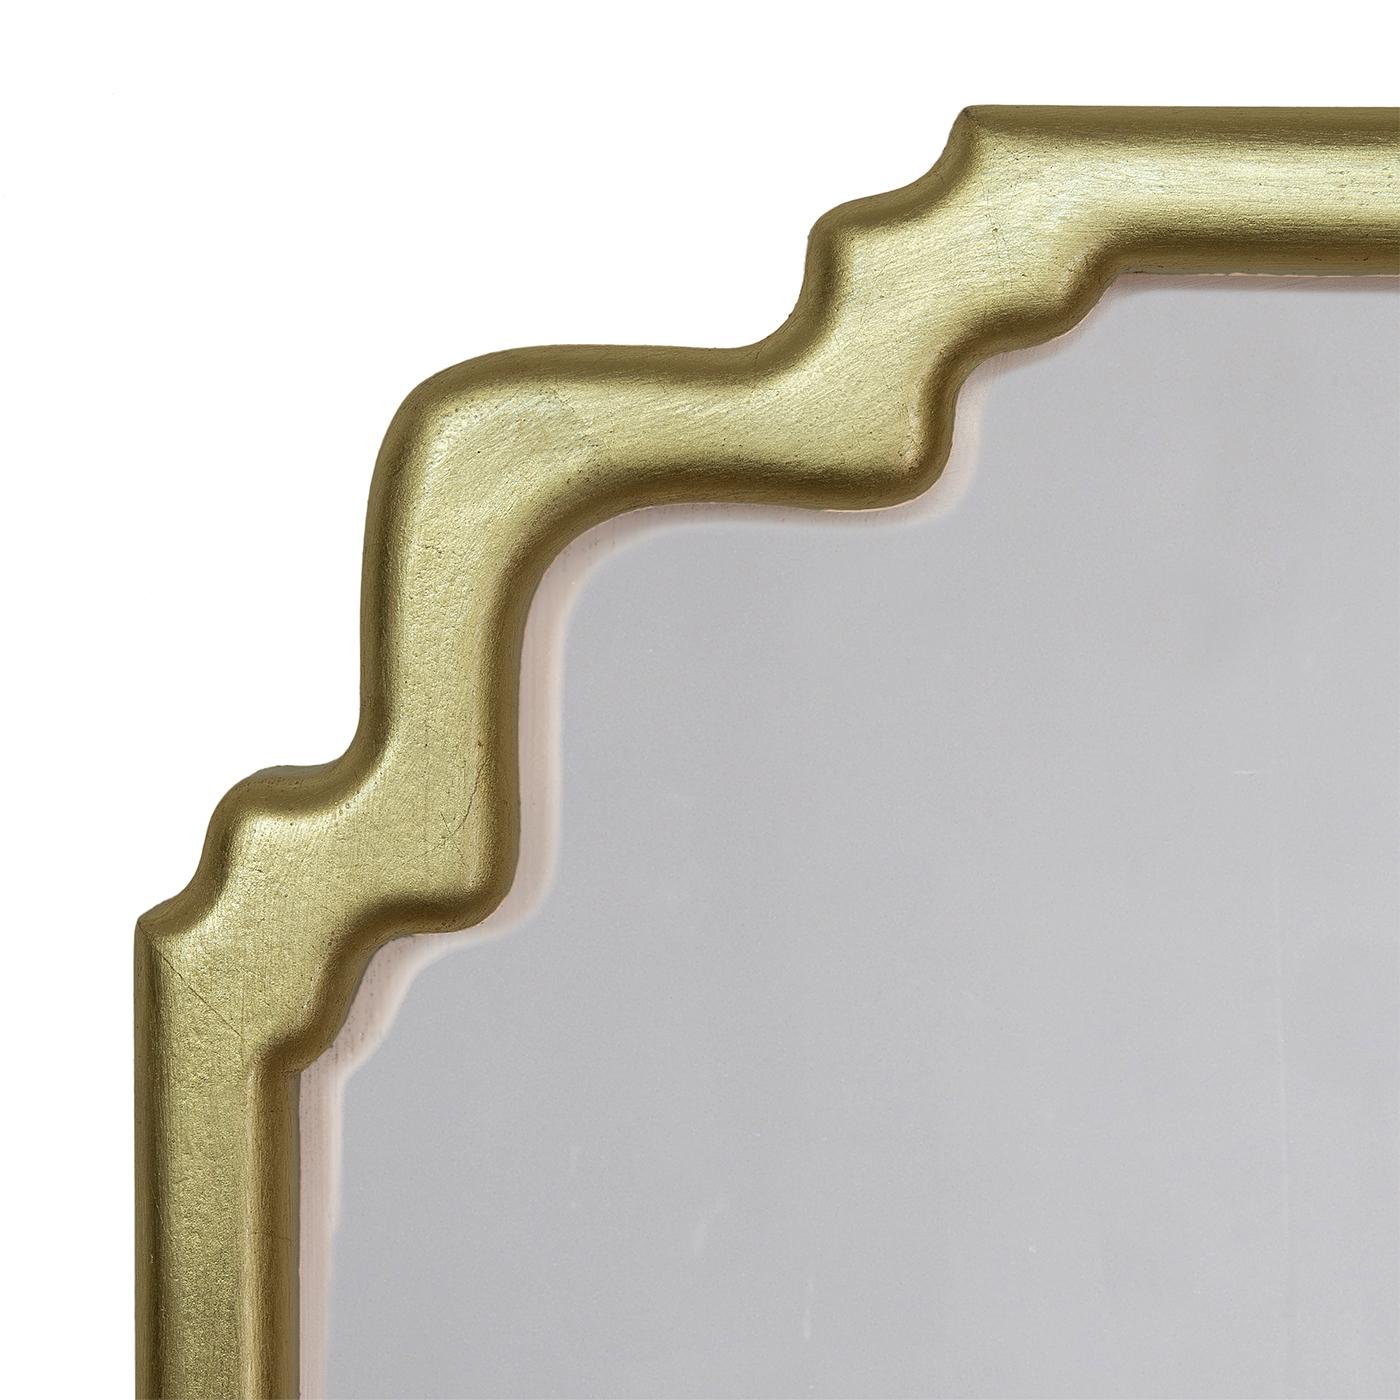 Elan Gold is a new Art Deco wood mirror frame. The form is simple and elegant and suitable for any space particularly if used as a pair. The gold leaf finish is handmade in the Spini lab in Florence. Please, contact the Concierge for customization